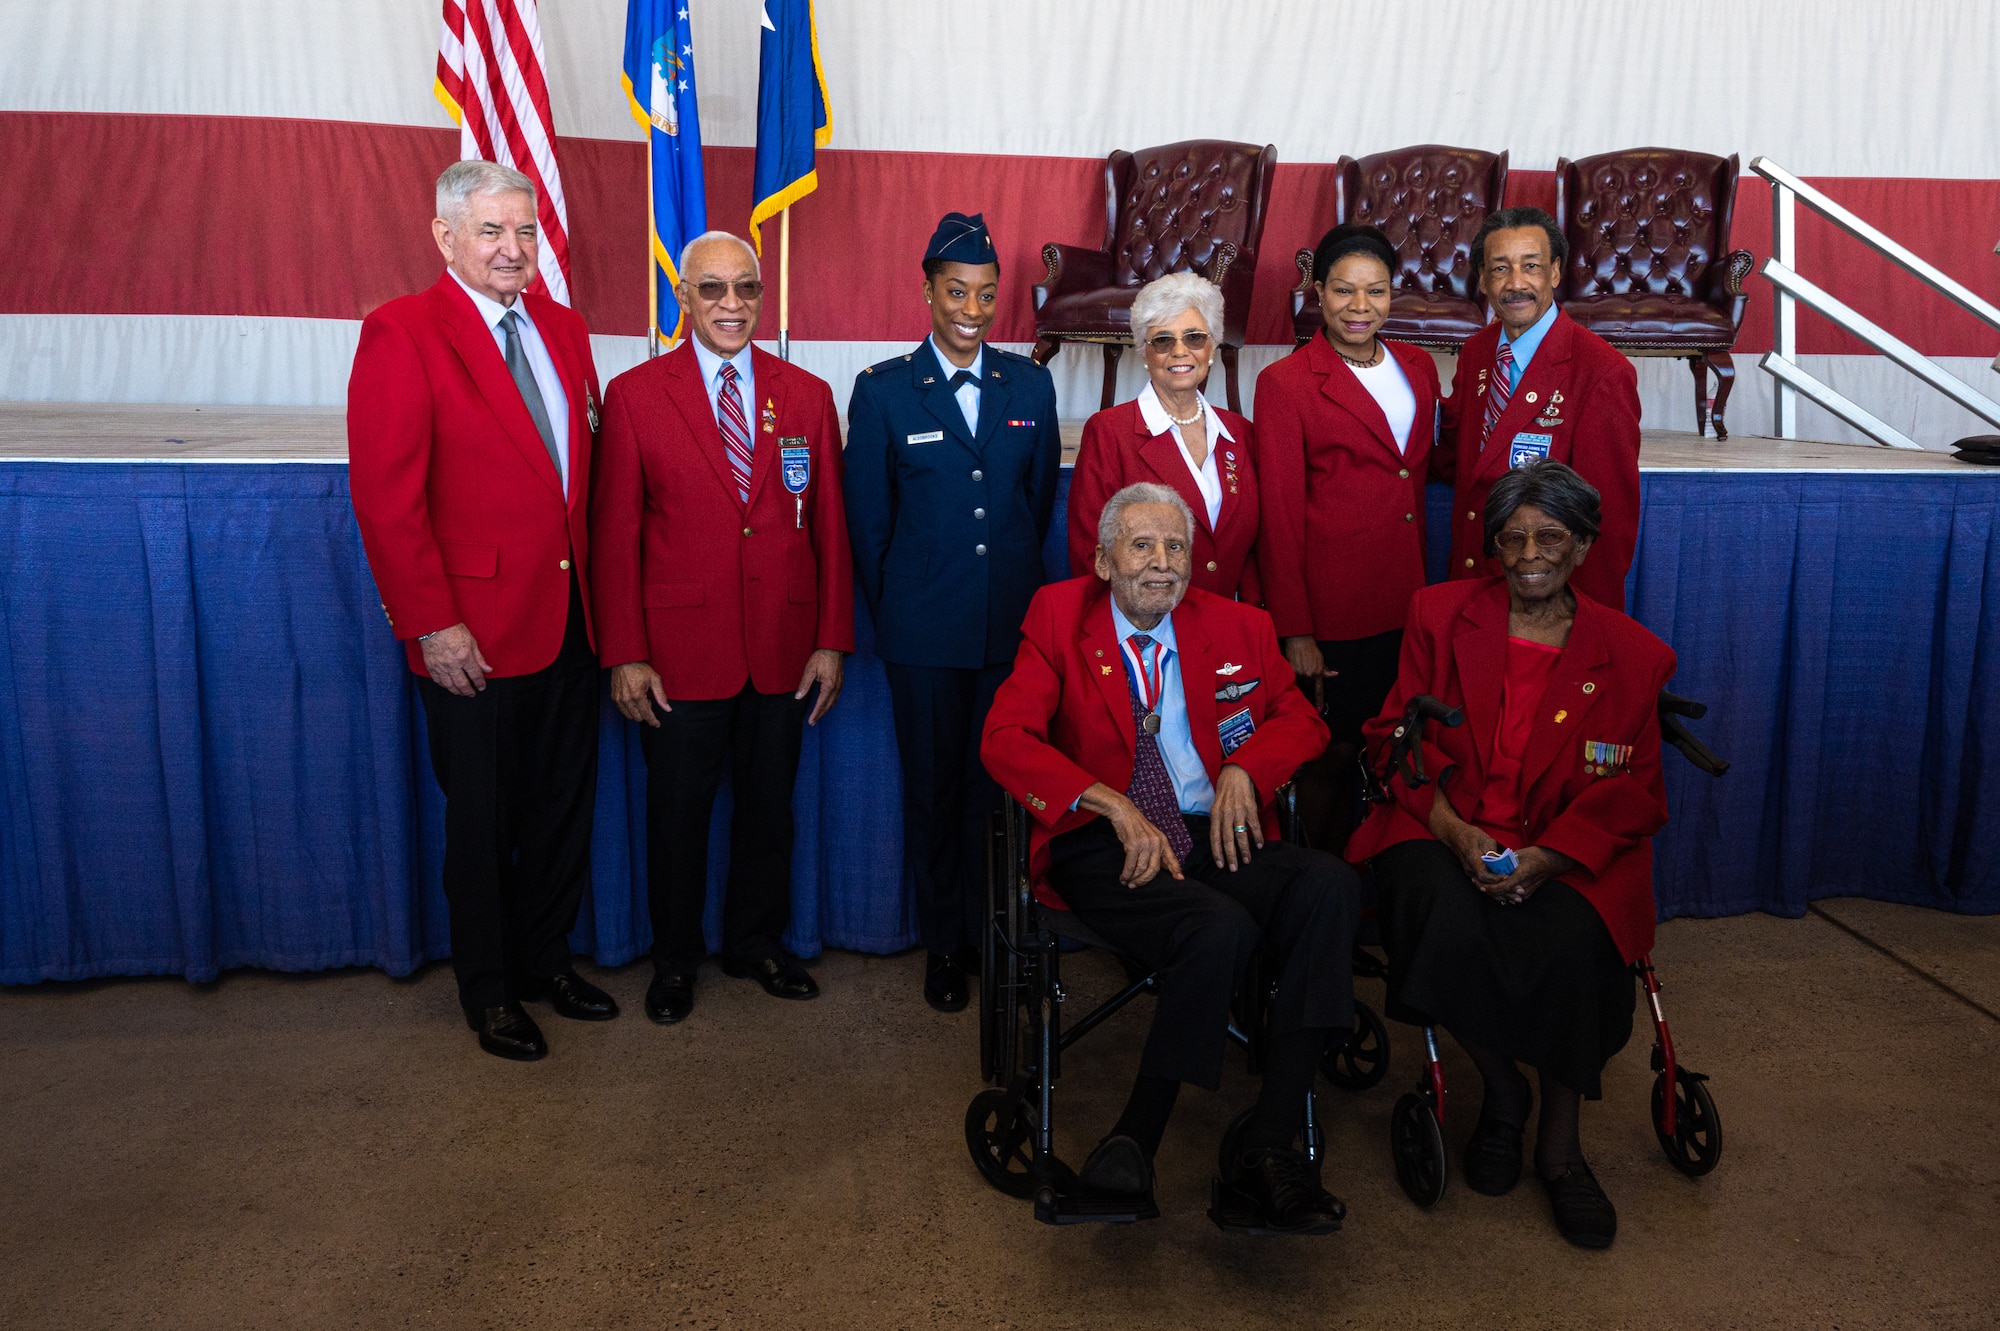 Members of the Archer-Ragsdale Arizona Chapter of Tuskegee Airmen pose for a photo at the 9th Annual Tuskegee Airmen Commemoration Day celebration March 24, 2022, at Luke Air Force Base, Arizona.